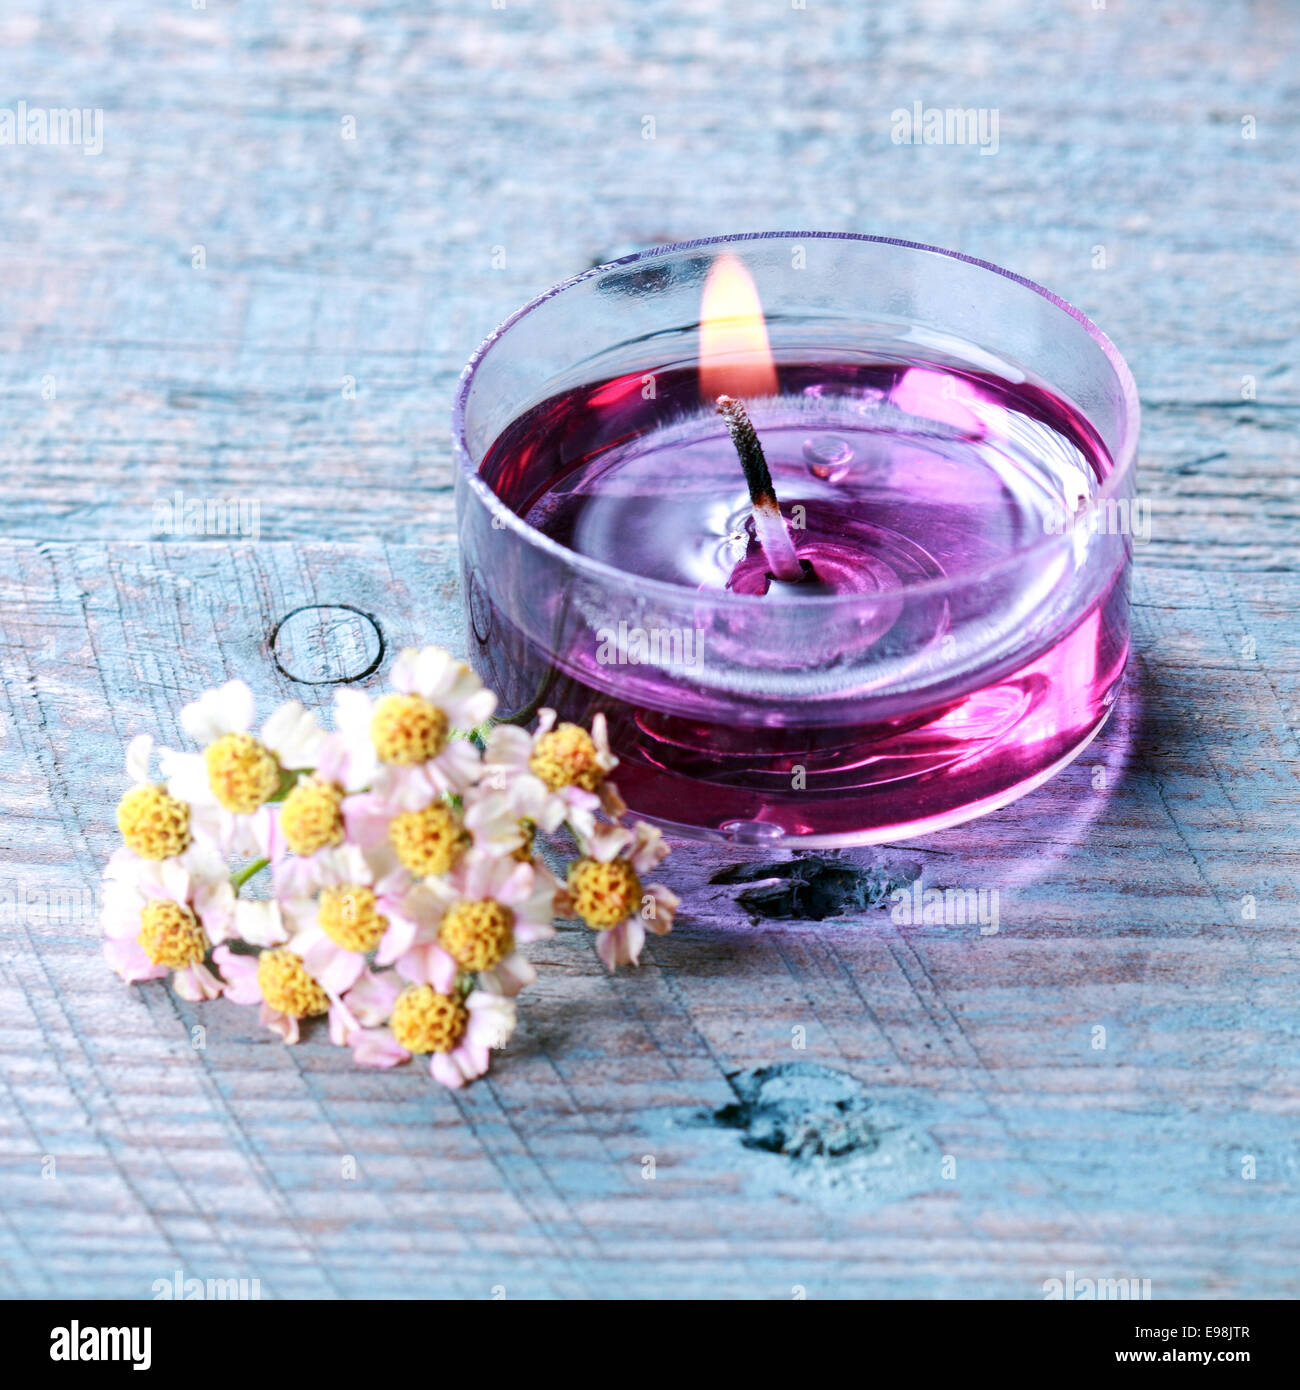 Aromatherapy spa concept with fresh white summer blossoms alongside a fragrant translucent purple burning candle with plant extracts and essential oils Stock Photo